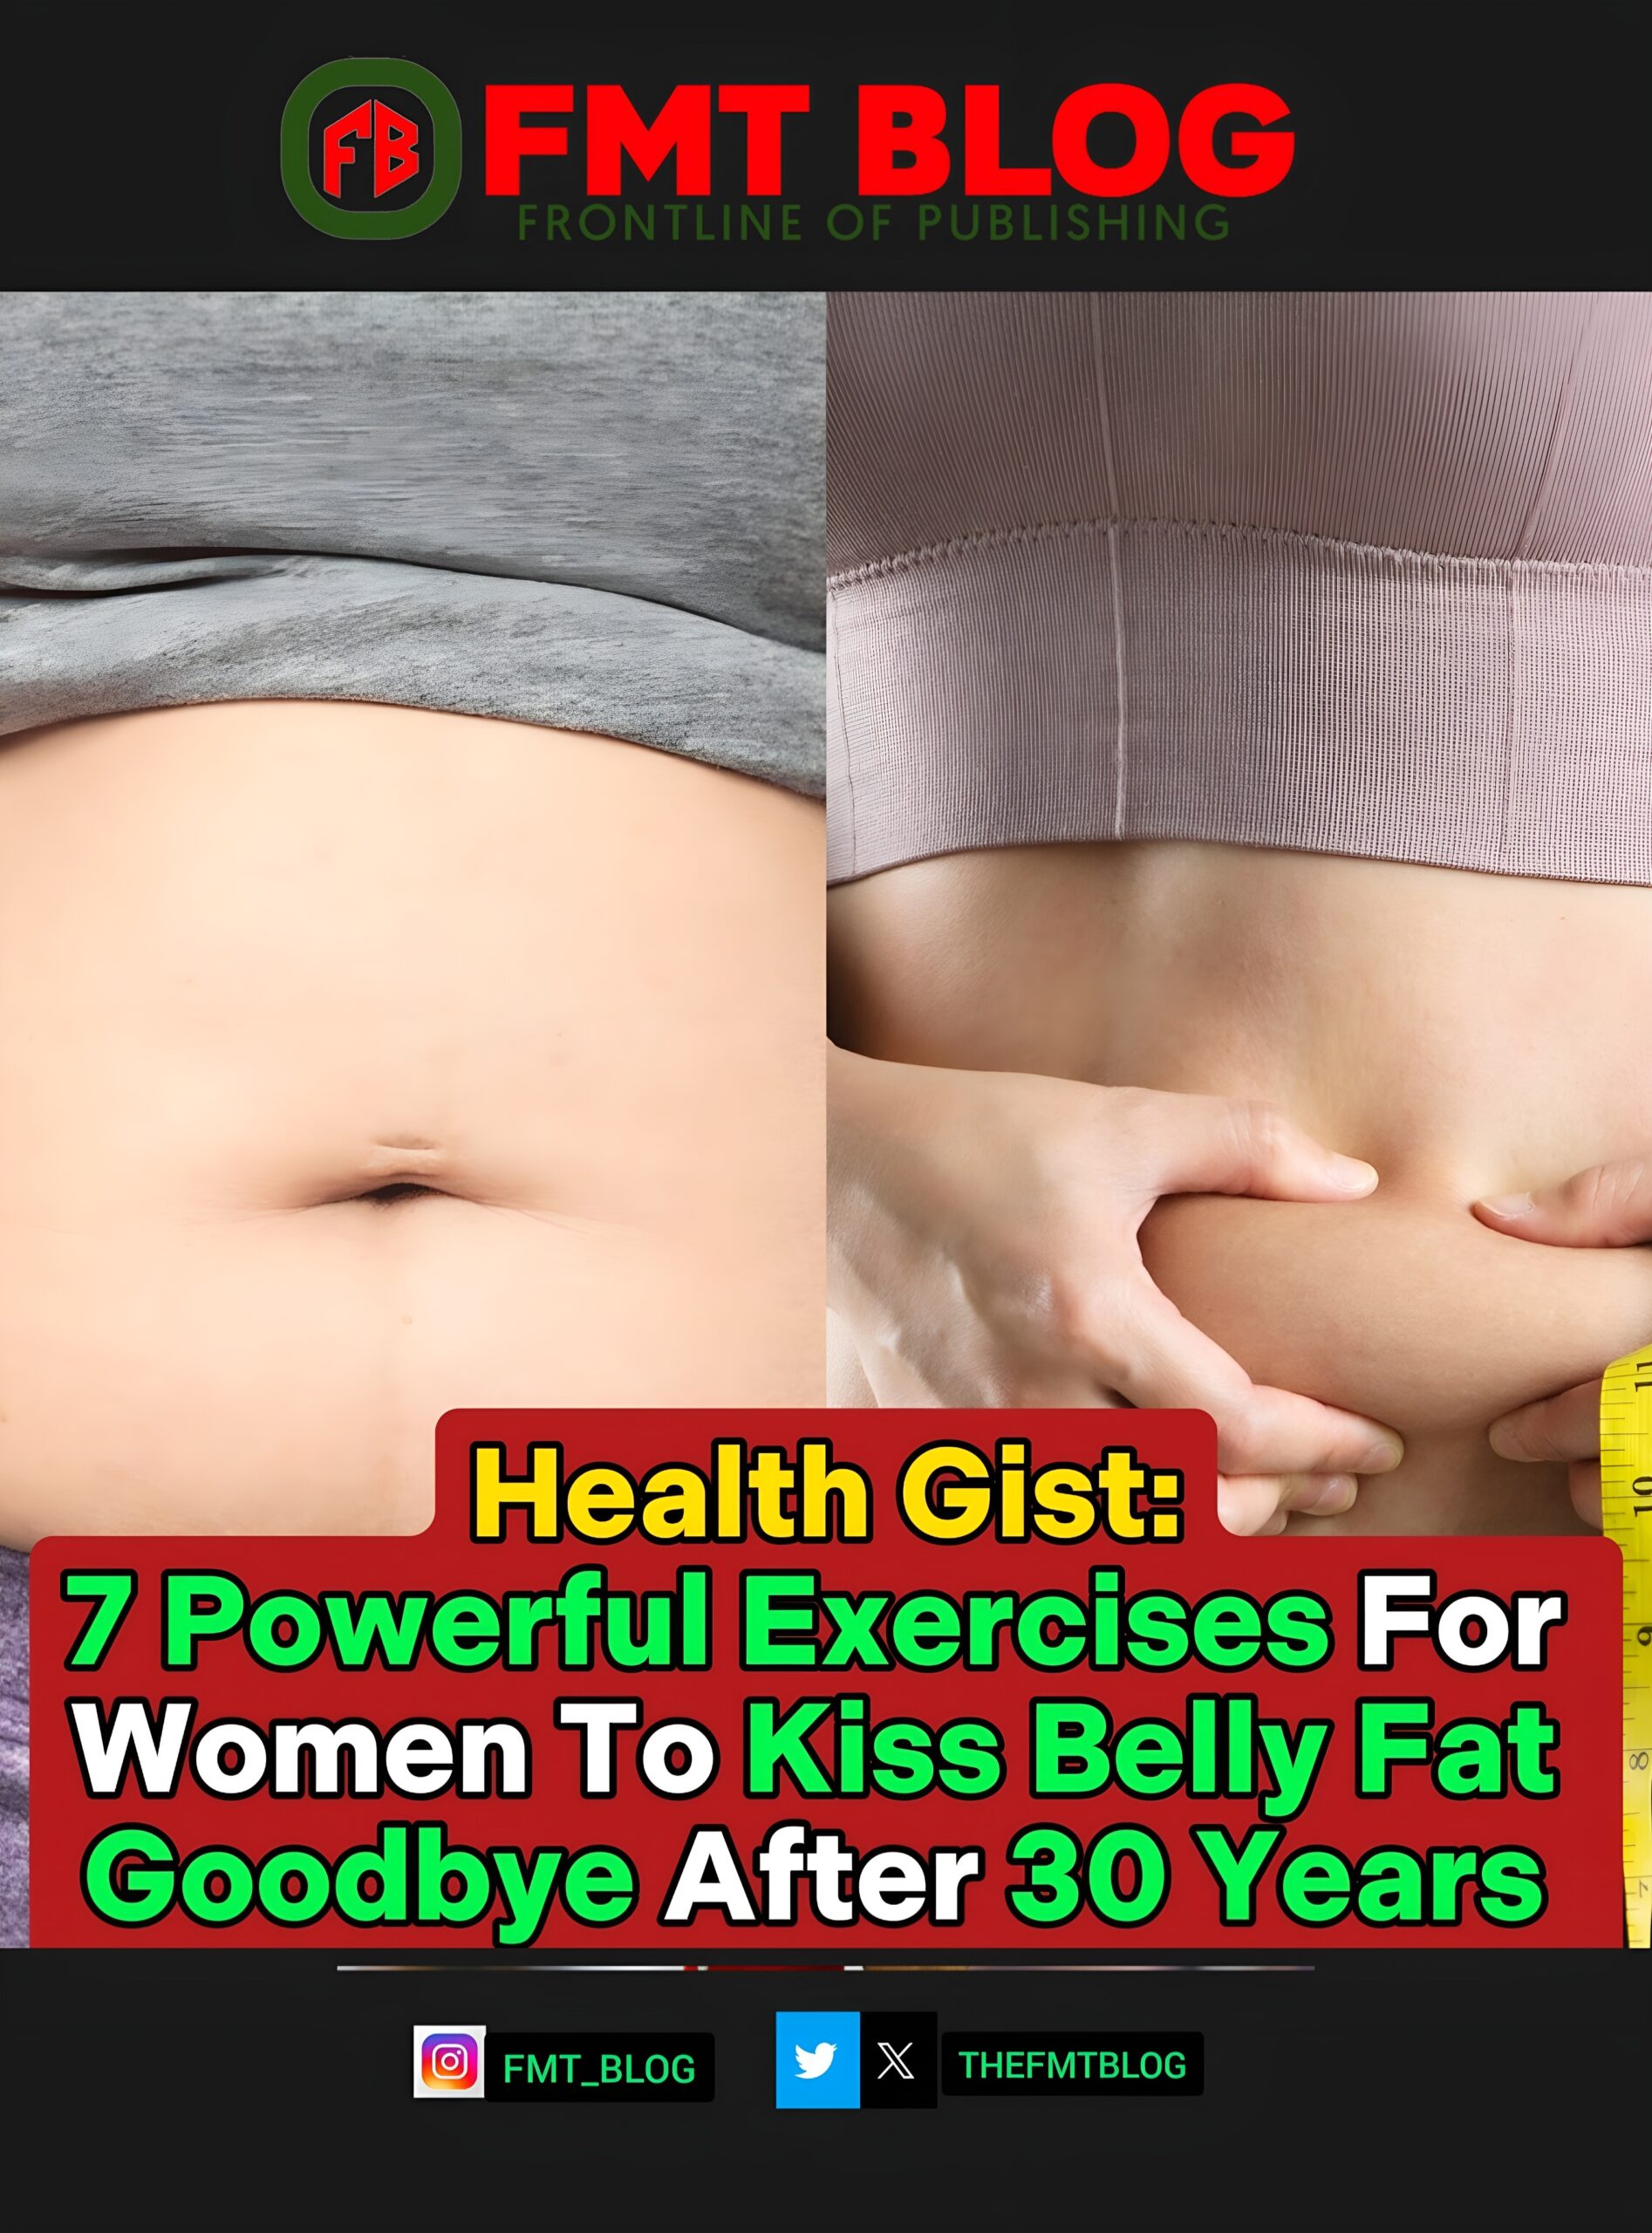 7 Powerful Exercises For Women To Kiss Belly Fat Goodbye After 30 Years